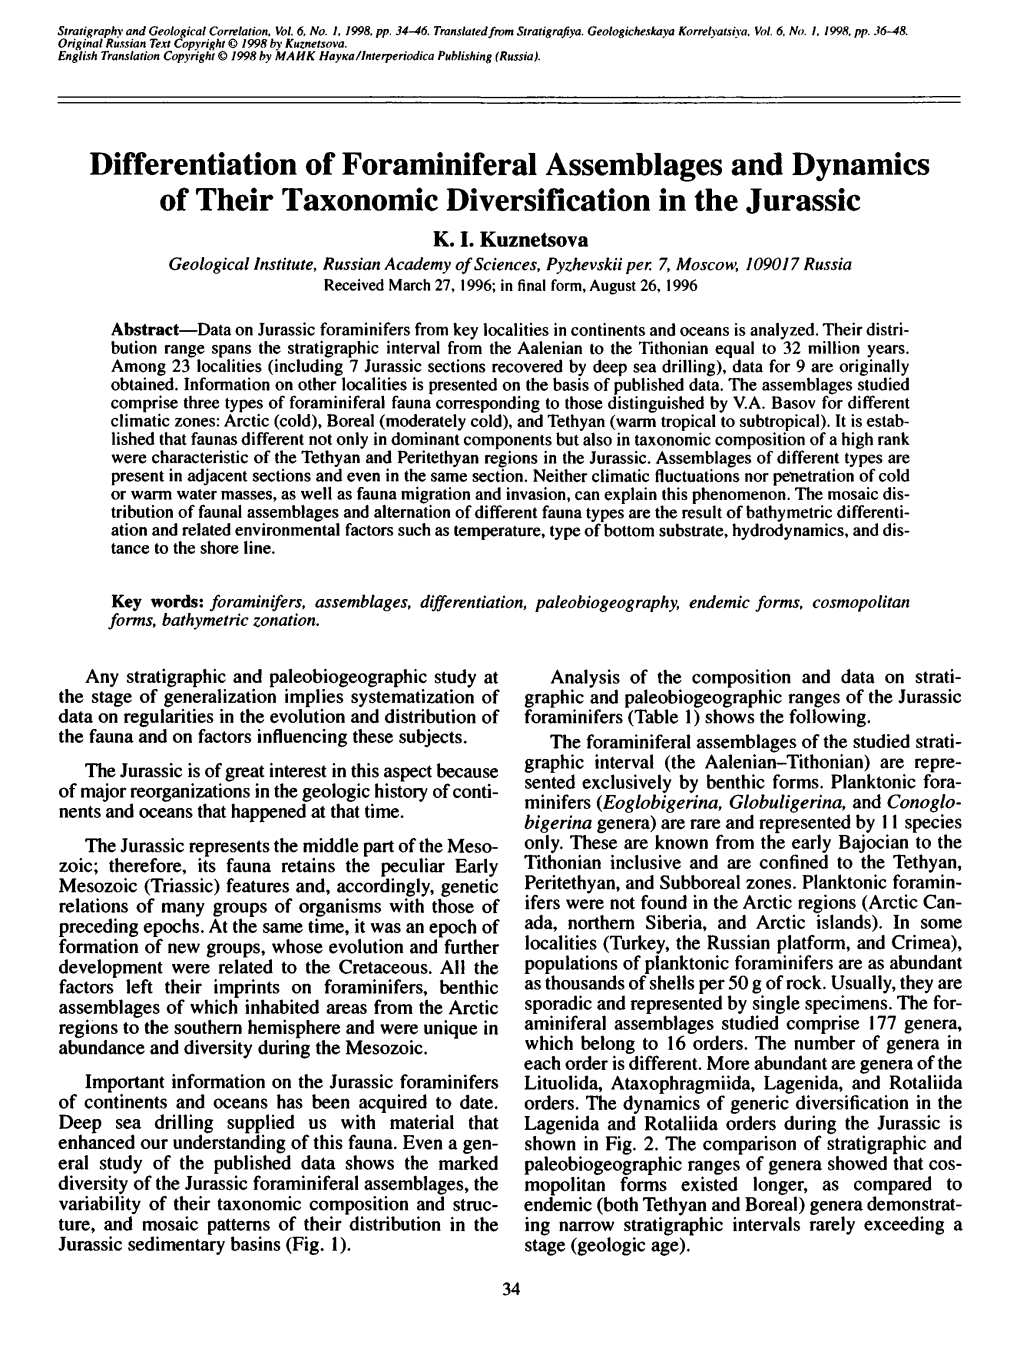 Differentiation of Foraminiferal Assemblages and Dynamics of Their Taxonomic Diversification in the Jurassic K